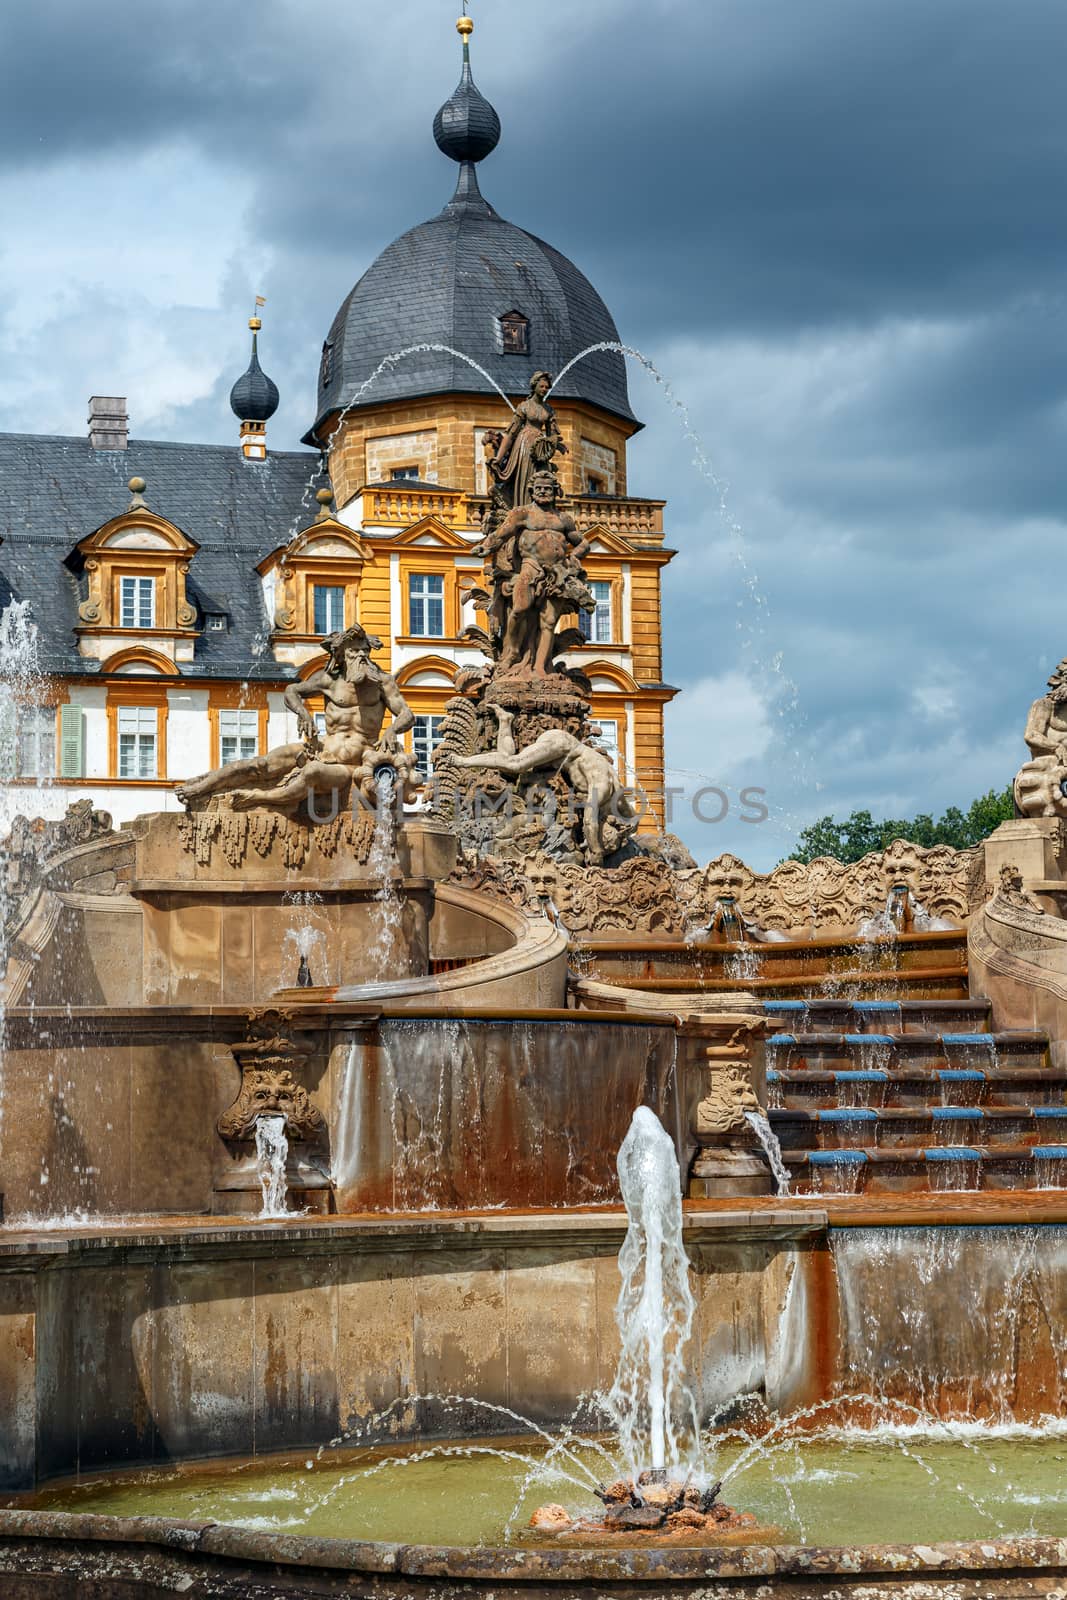 Seehof Palace and Park, Fountain on the background of the castle by seka33